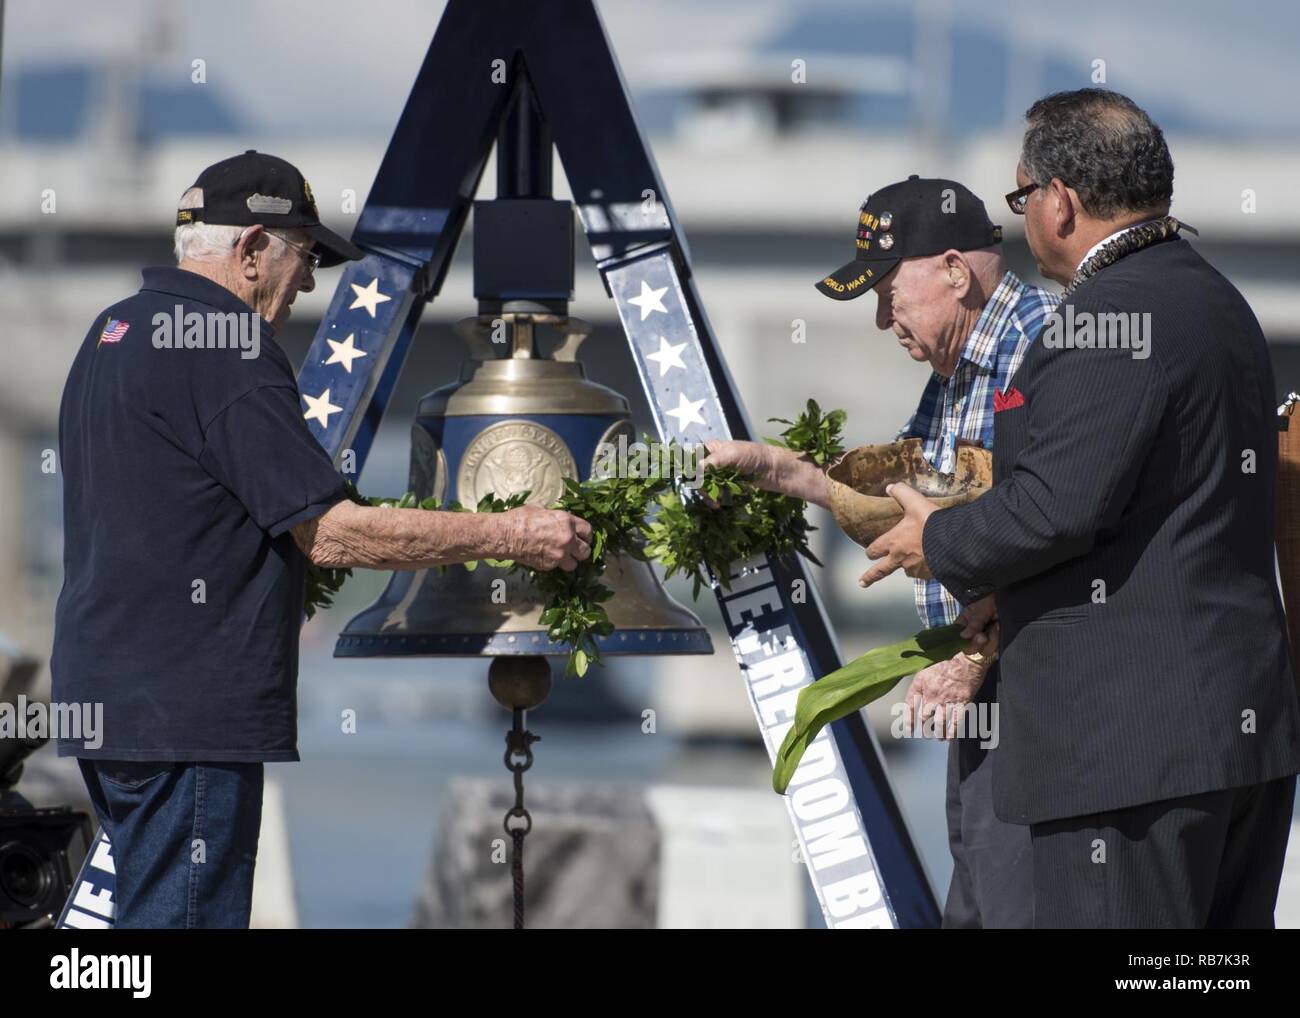 PEARL HARBOR (Dec. 6, 2016) Kahu Kelekona Bishaw, right, and World War II veterans perform a blessing during an America's Freedom Bell ringing ceremony at the USS Bowfin Submarine Museum and Park. Dec. 7, 2016, marks the 75th anniversary of the attacks on Pearl Harbor and Oahu. The U.S. military and the State of Hawaii are hosting a series of remembrance events throughout the week to honor the courage and sacrifices of those who served Dec. 7, 1941, and throughout the Pacific theater. As a Pacific nation, the U.S. is committed to continue its responsibility of protecting the Pacific sea-lanes, Stock Photo